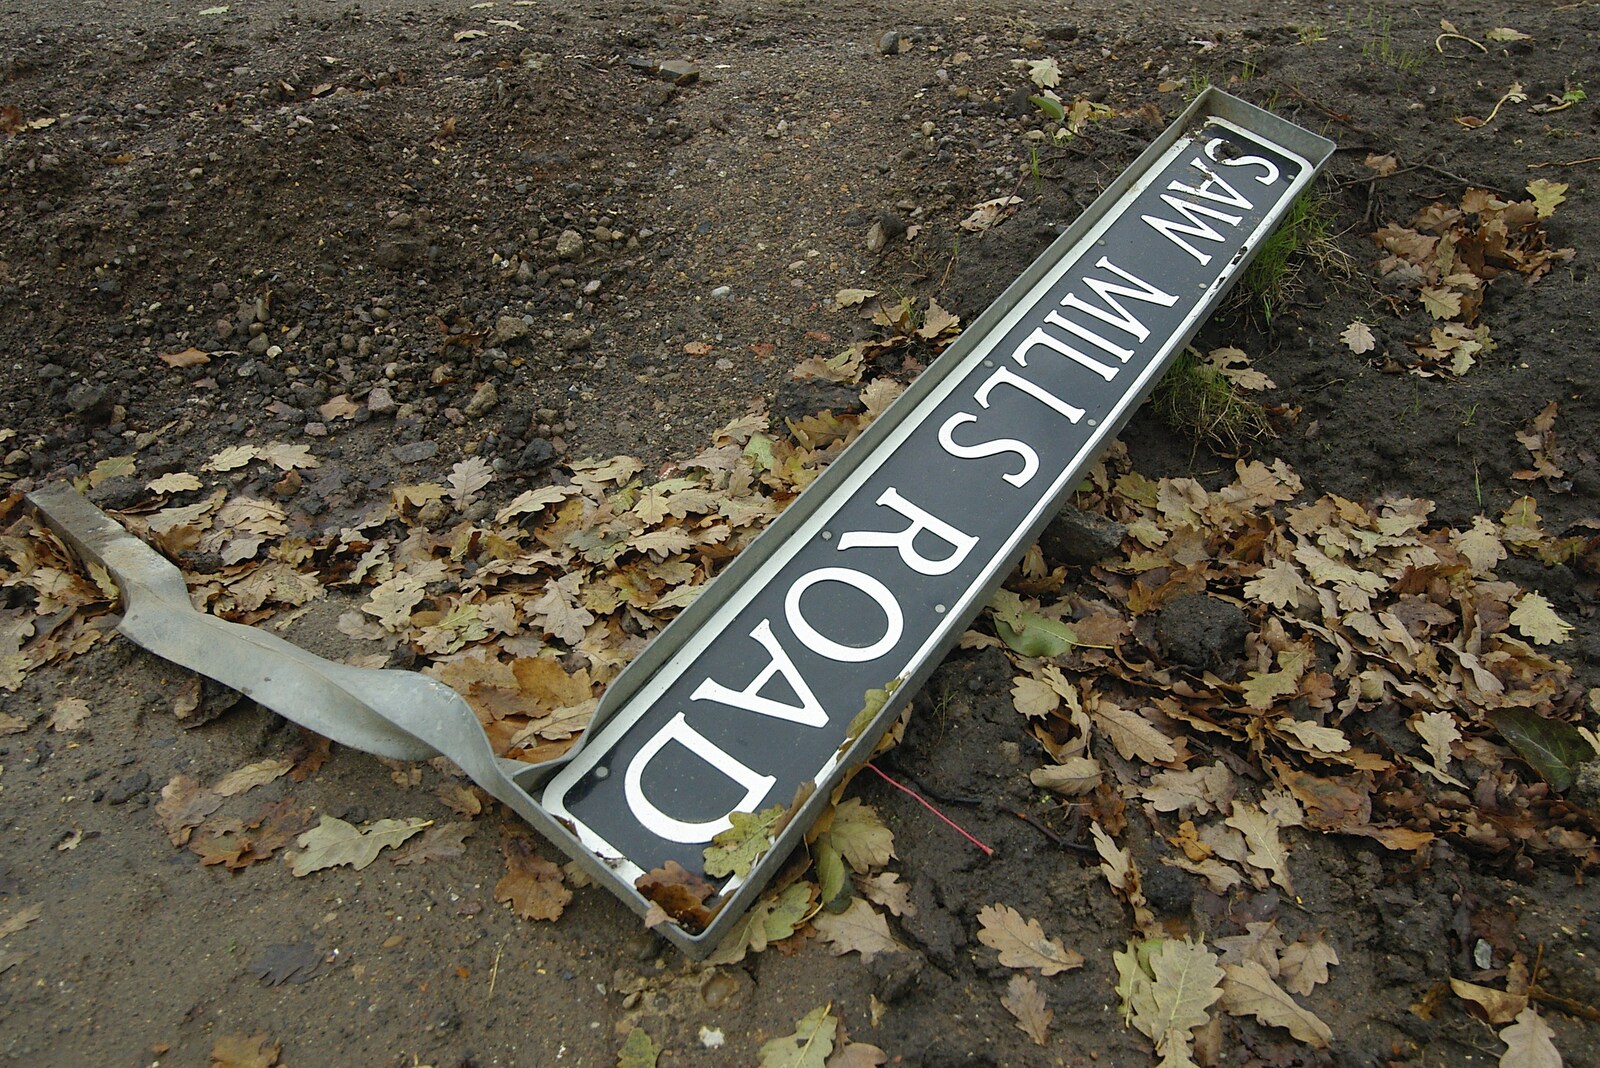 Discarded Sawmills Road sign from Post-modern Alienation: Bleak House, a Diss Miscellany, Norfolk - 3rd December 2005